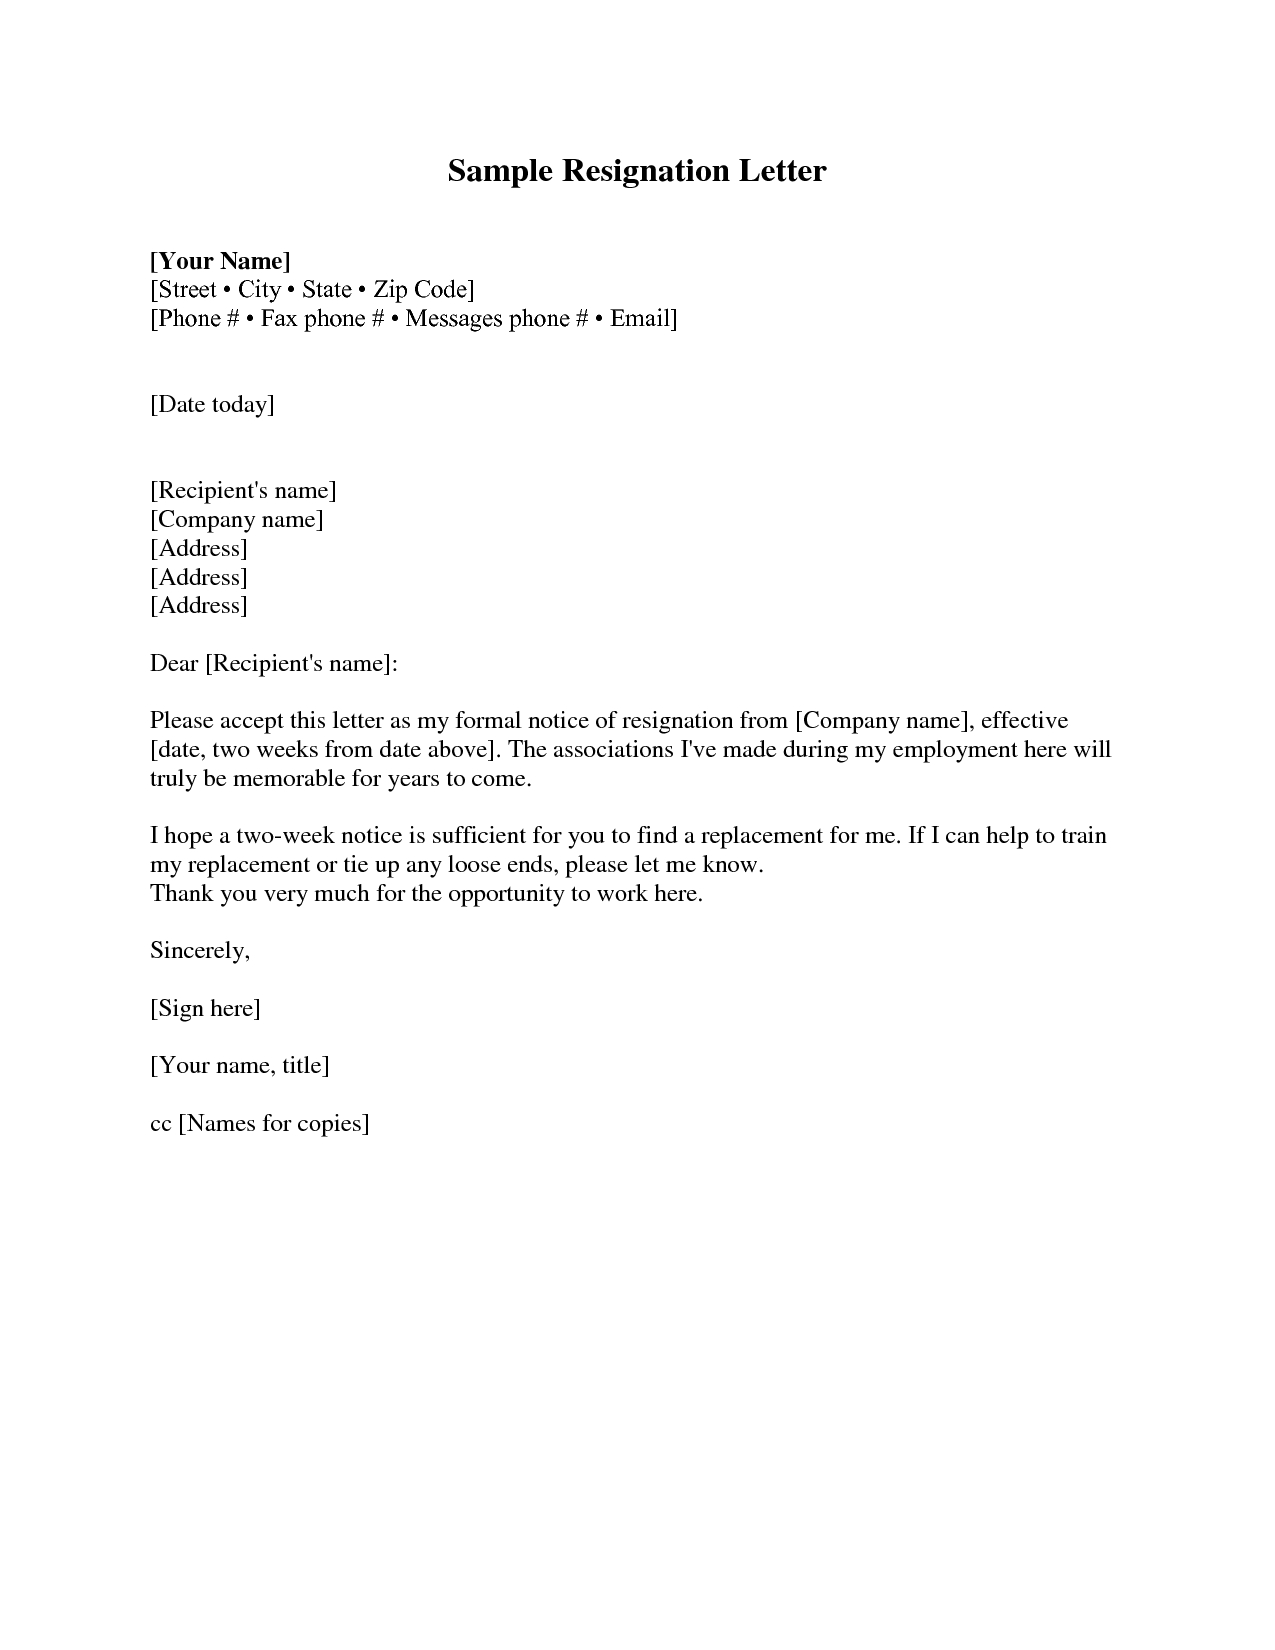 Writing A Resignation Letter Template - Resignation Letter Sample 2 Weeks Notice Free2img